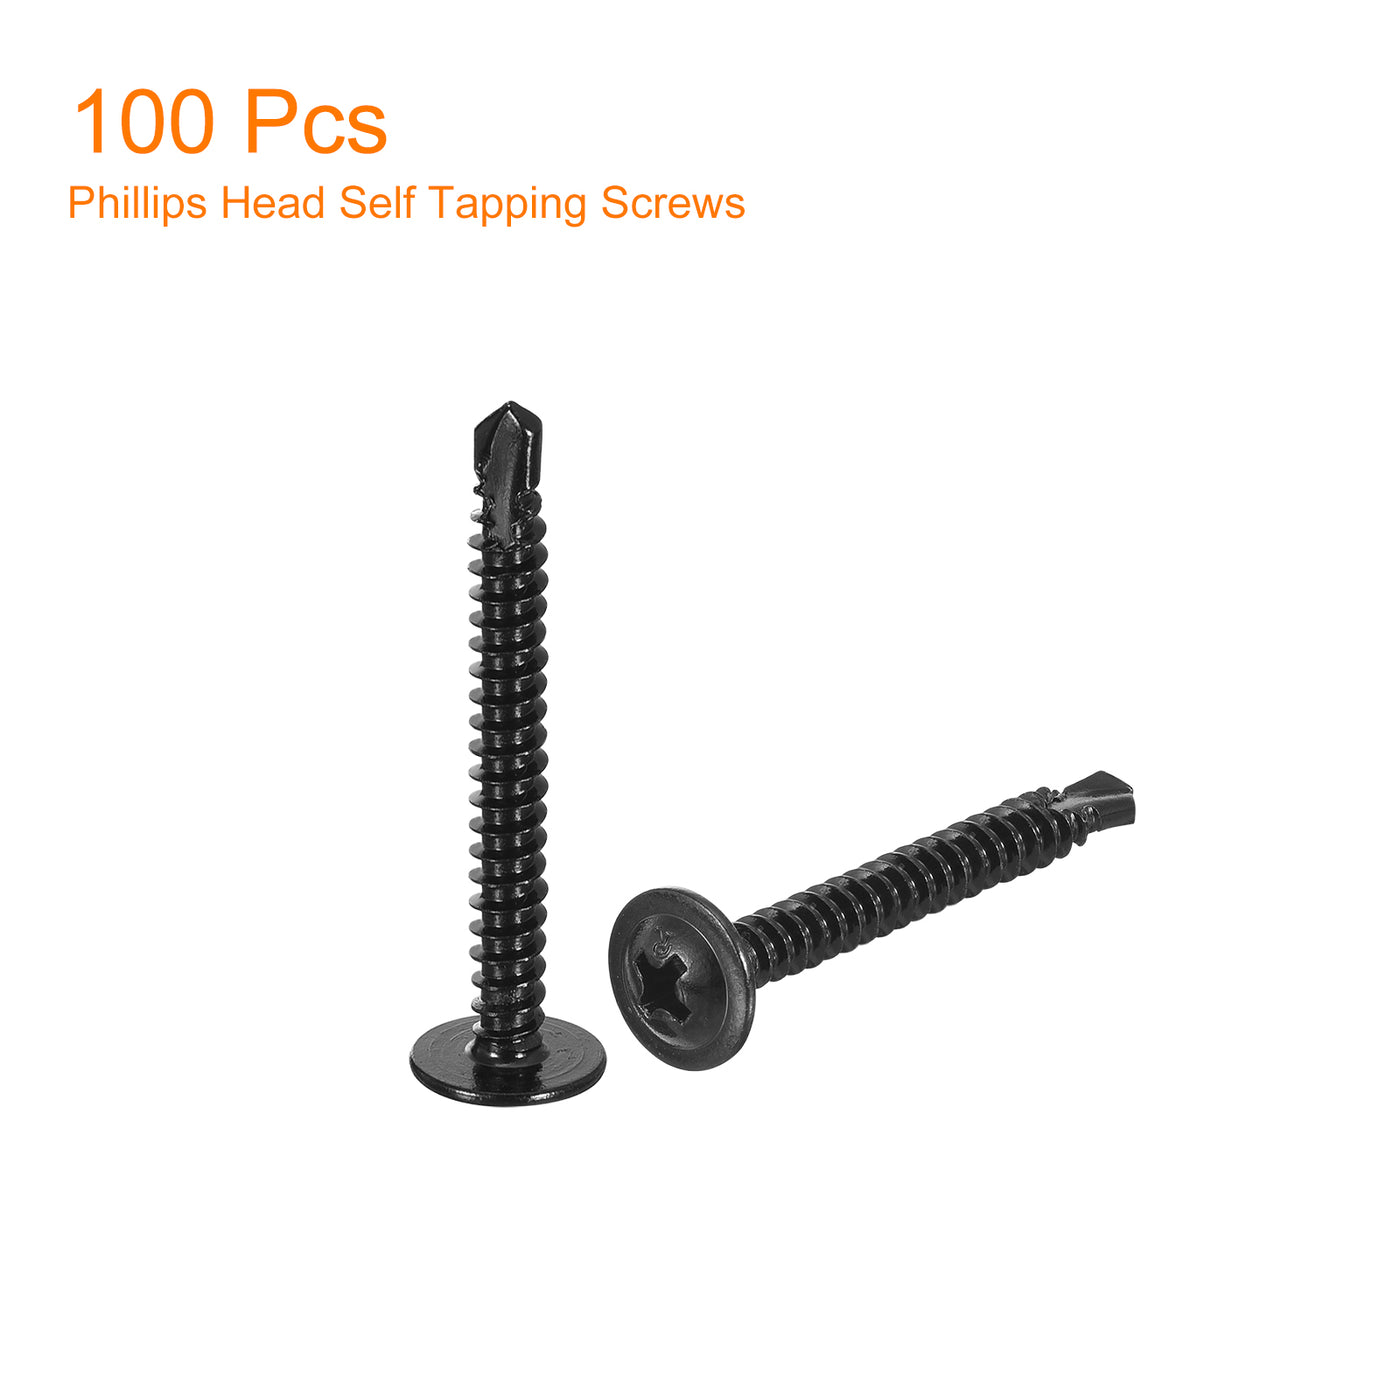 uxcell Uxcell Phillips Head Self Tapping Screws, 100pcs #8x1-1/2" Sheet Metal Screw